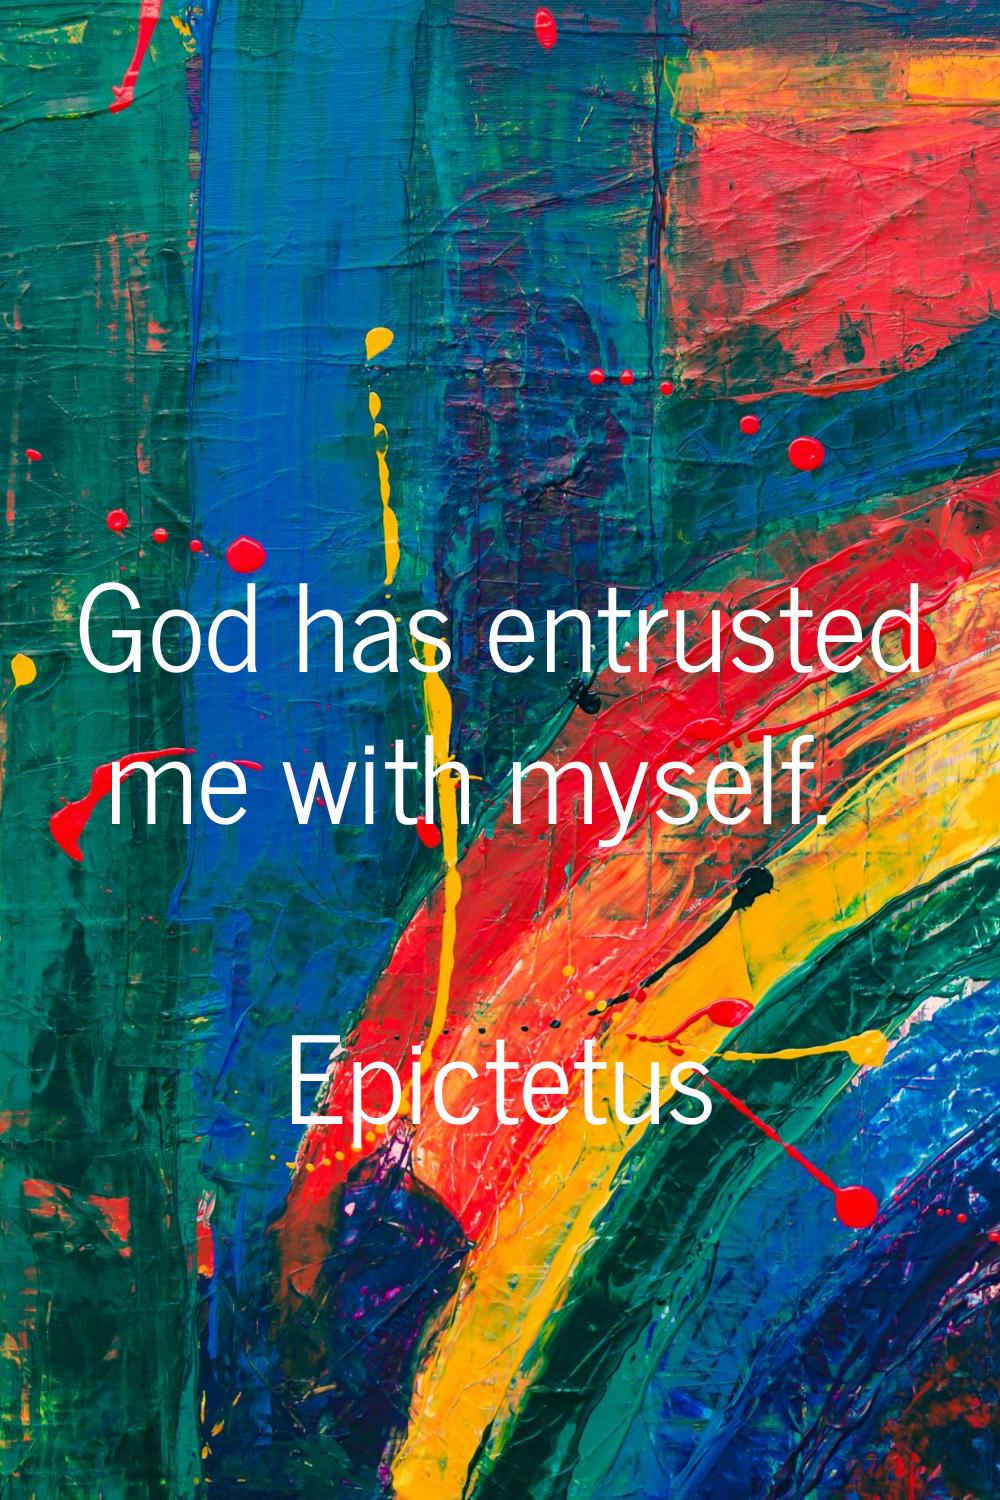 God has entrusted me with myself.